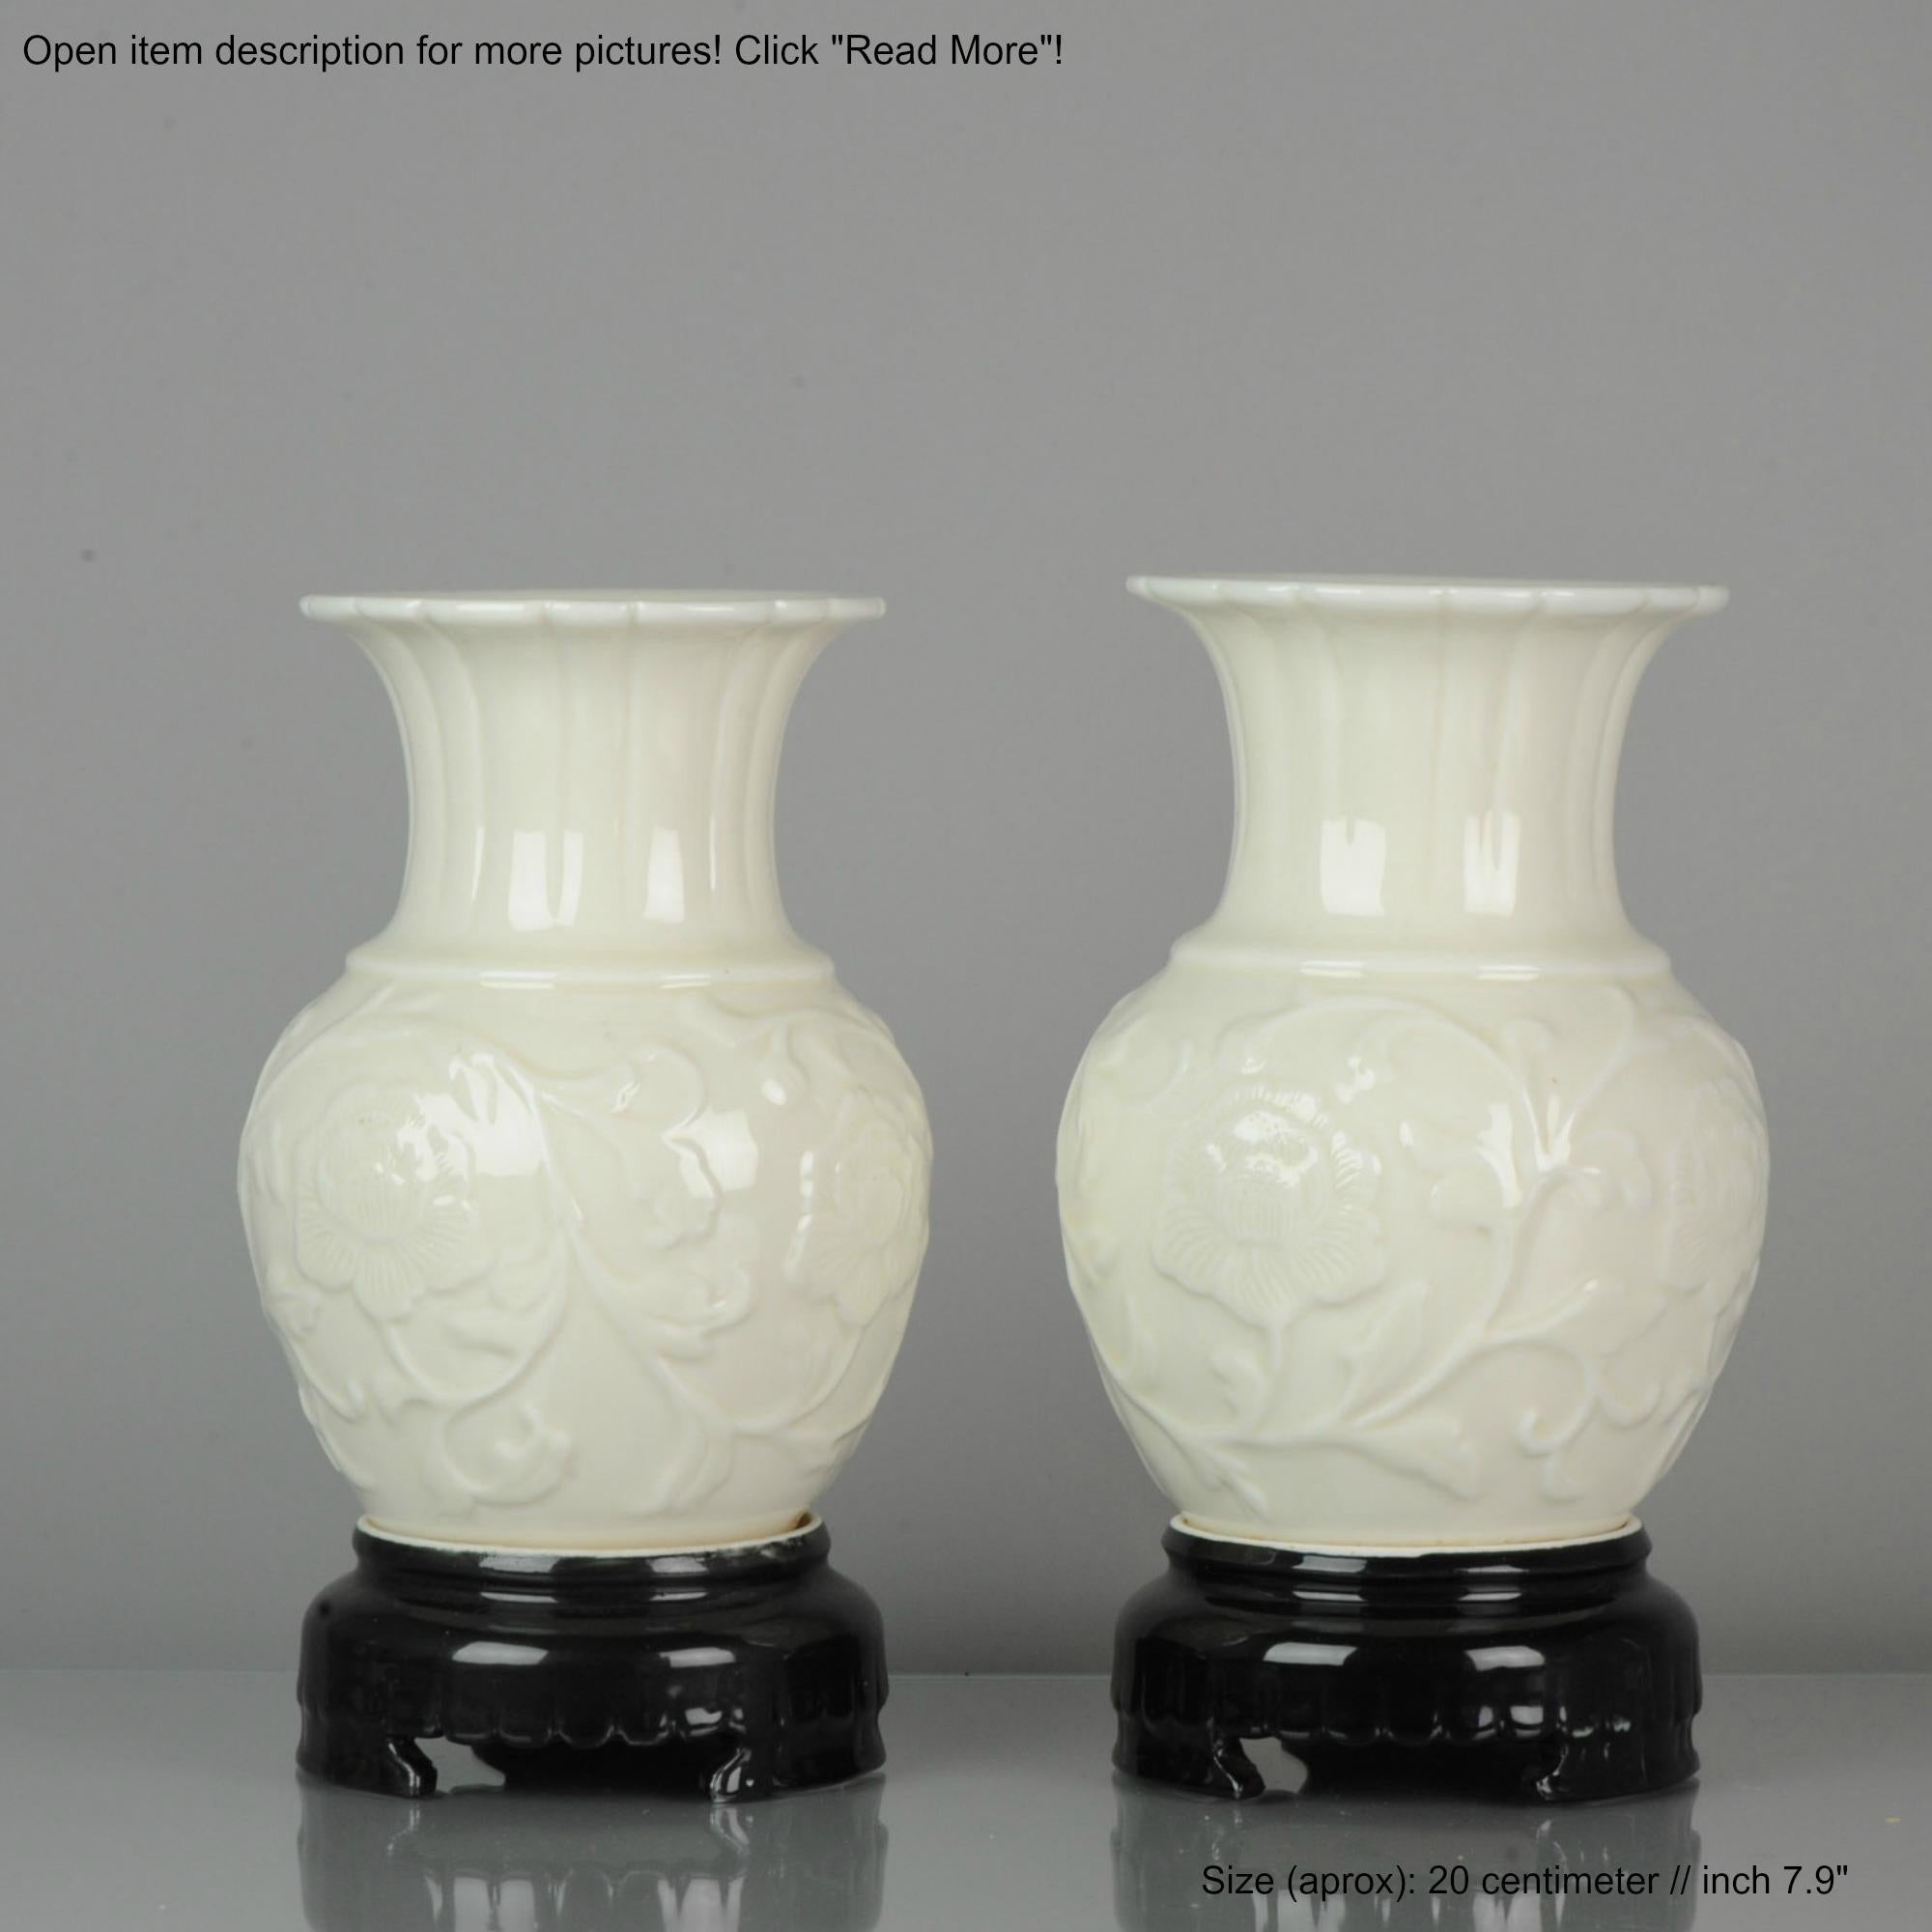 Very well made vases dating to 1978 and beautifully made. With a faux wooden base that is made of porcelain. Really top quality from a very interesting period in Chinese history

20-11-19-24-3

 

 
Condition
Overall condition perfect. Size